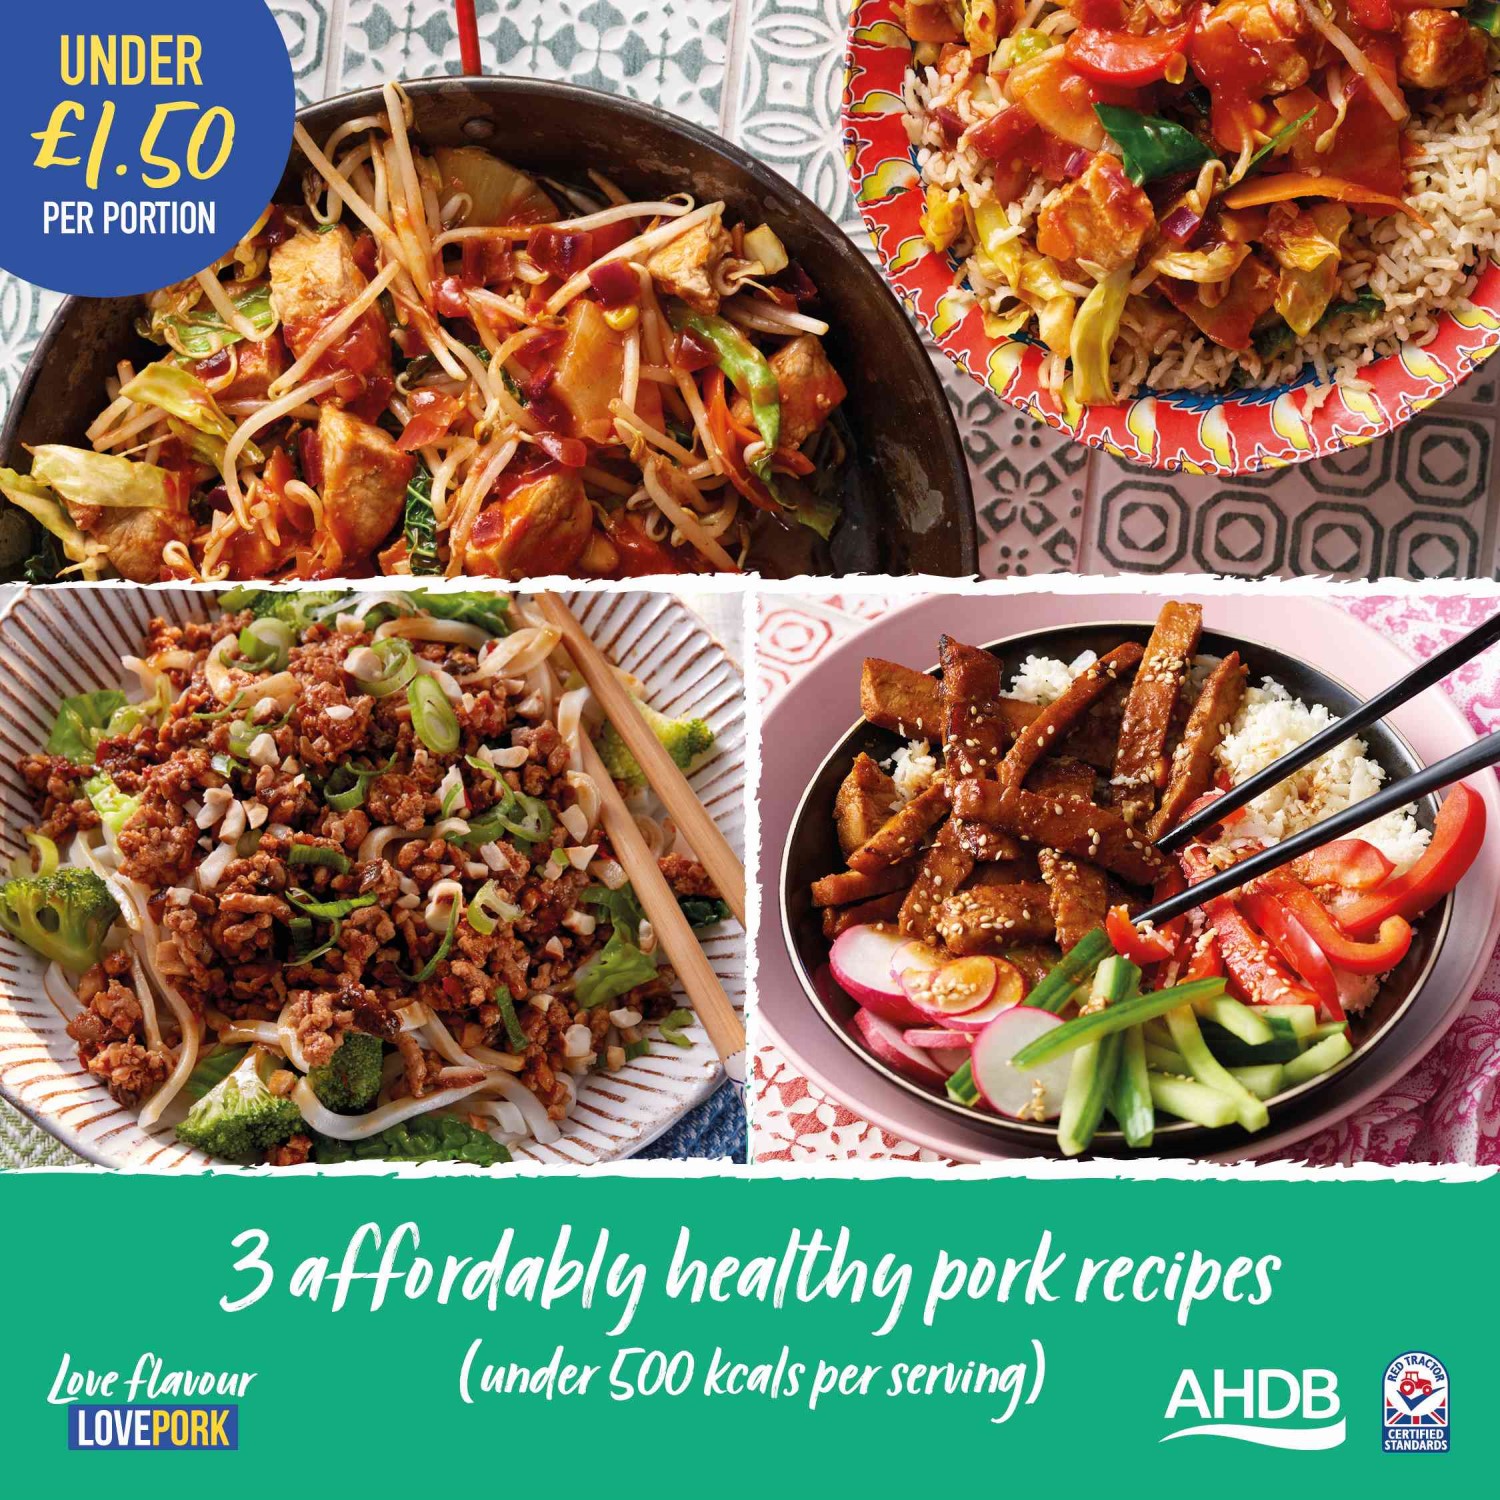 Grid image showing pork dishes that are affordably healthy